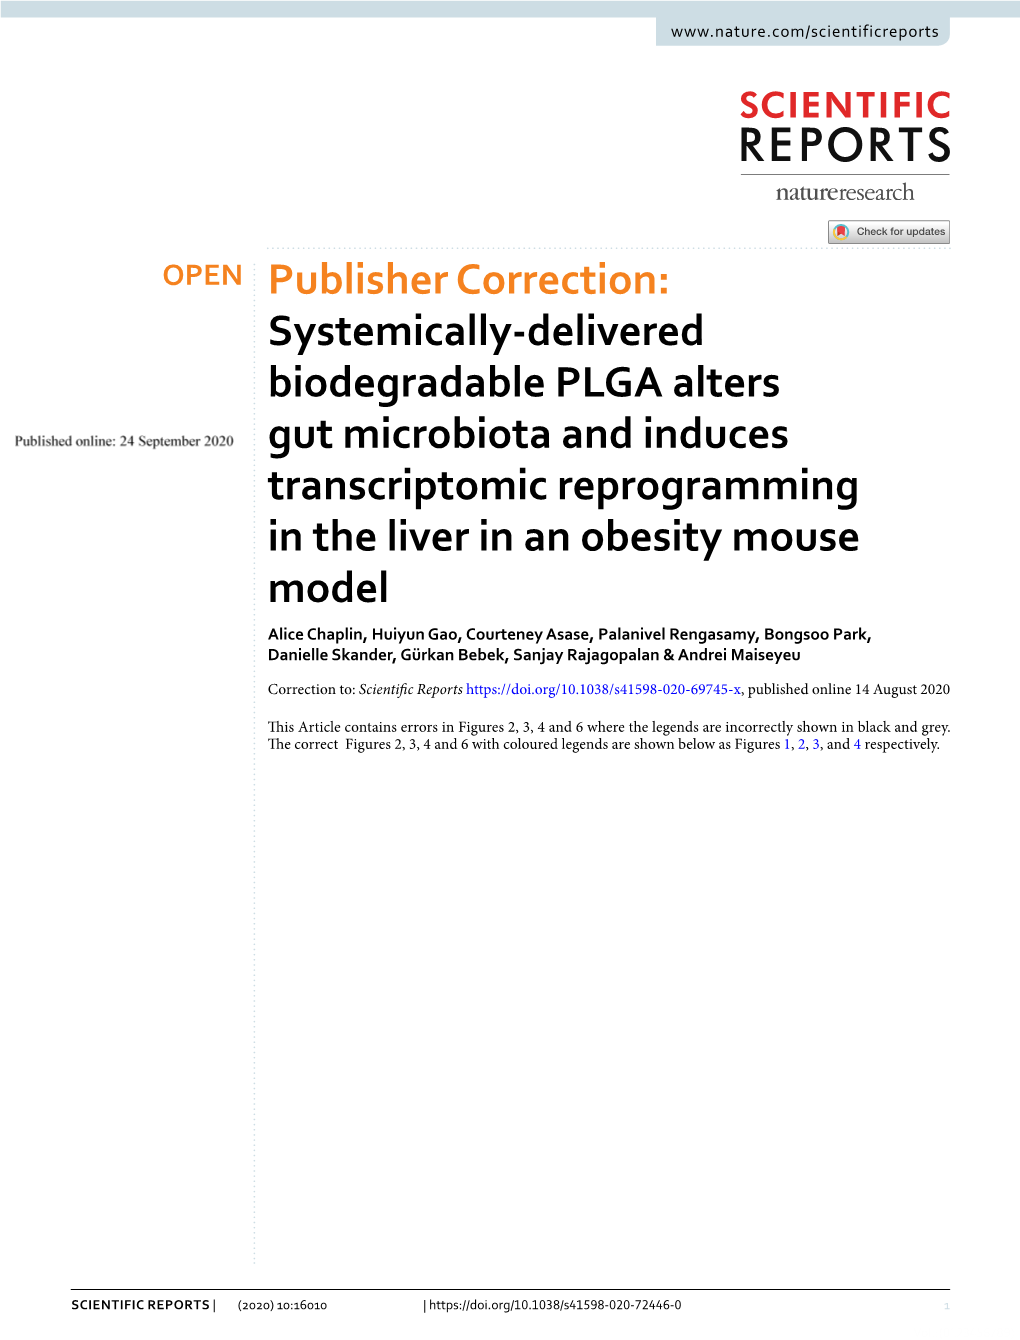 Publisher Correction: Systemically-Delivered